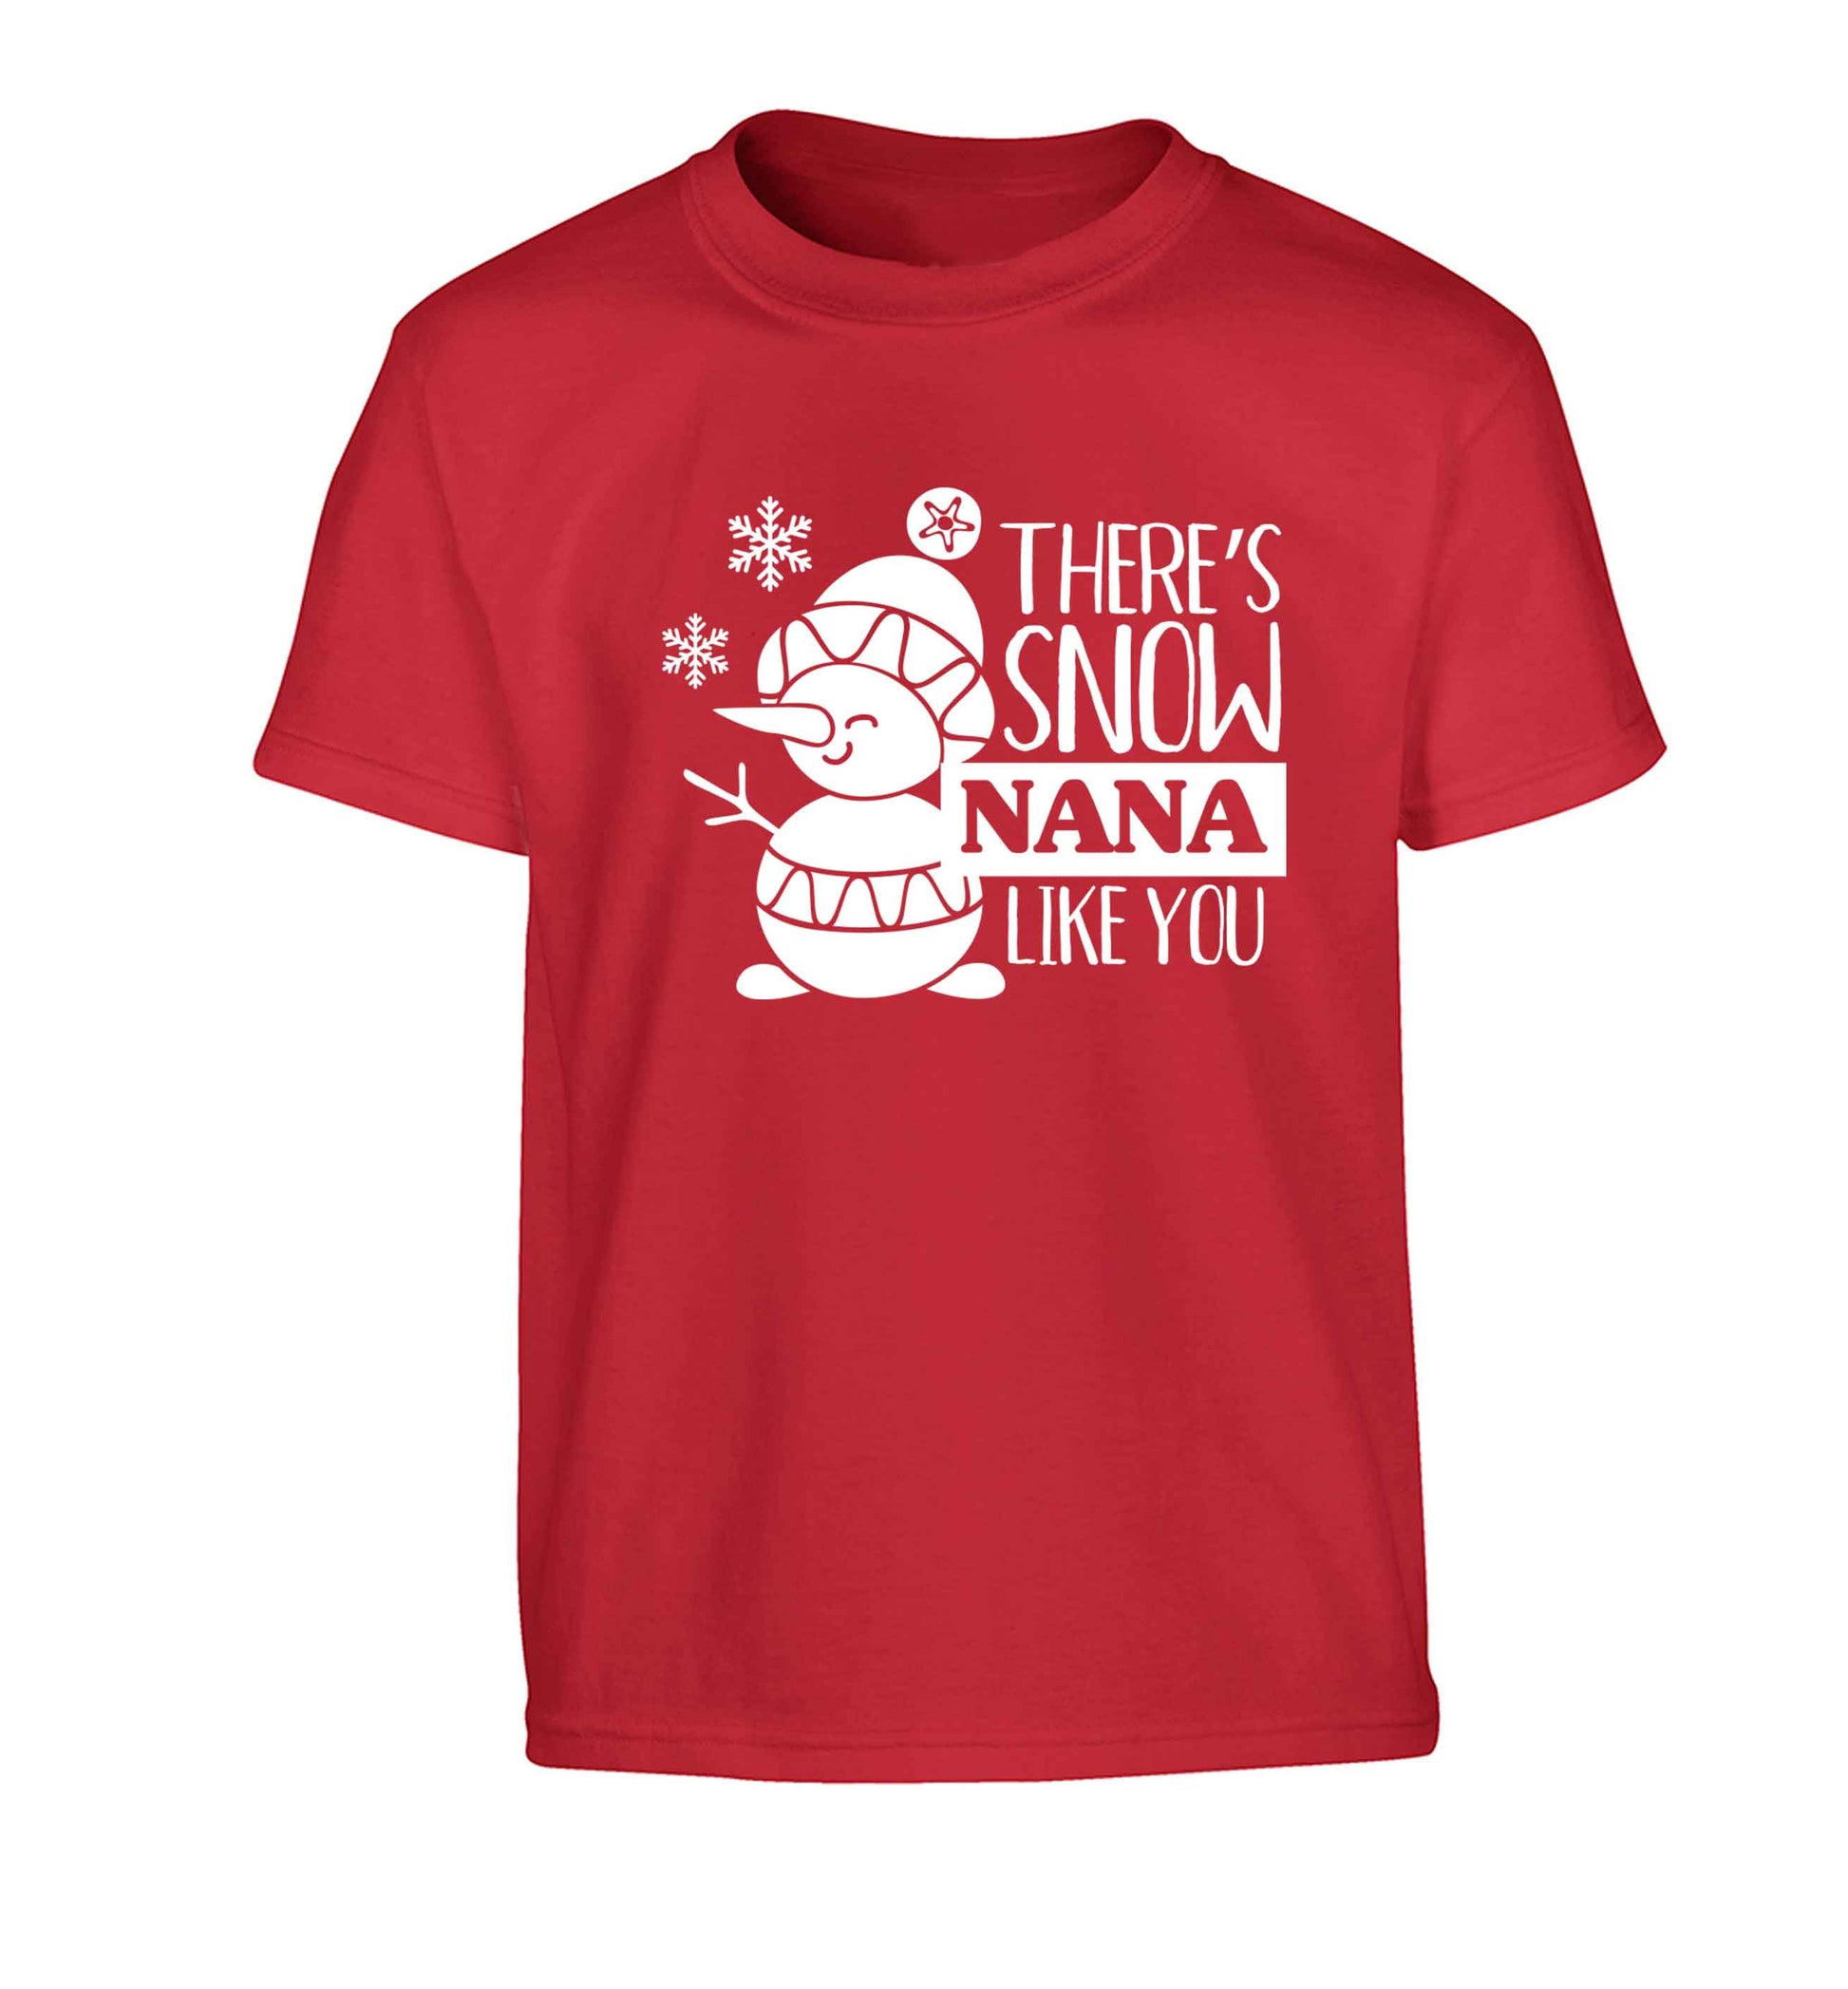 There's snow nana like you Children's red Tshirt 12-13 Years